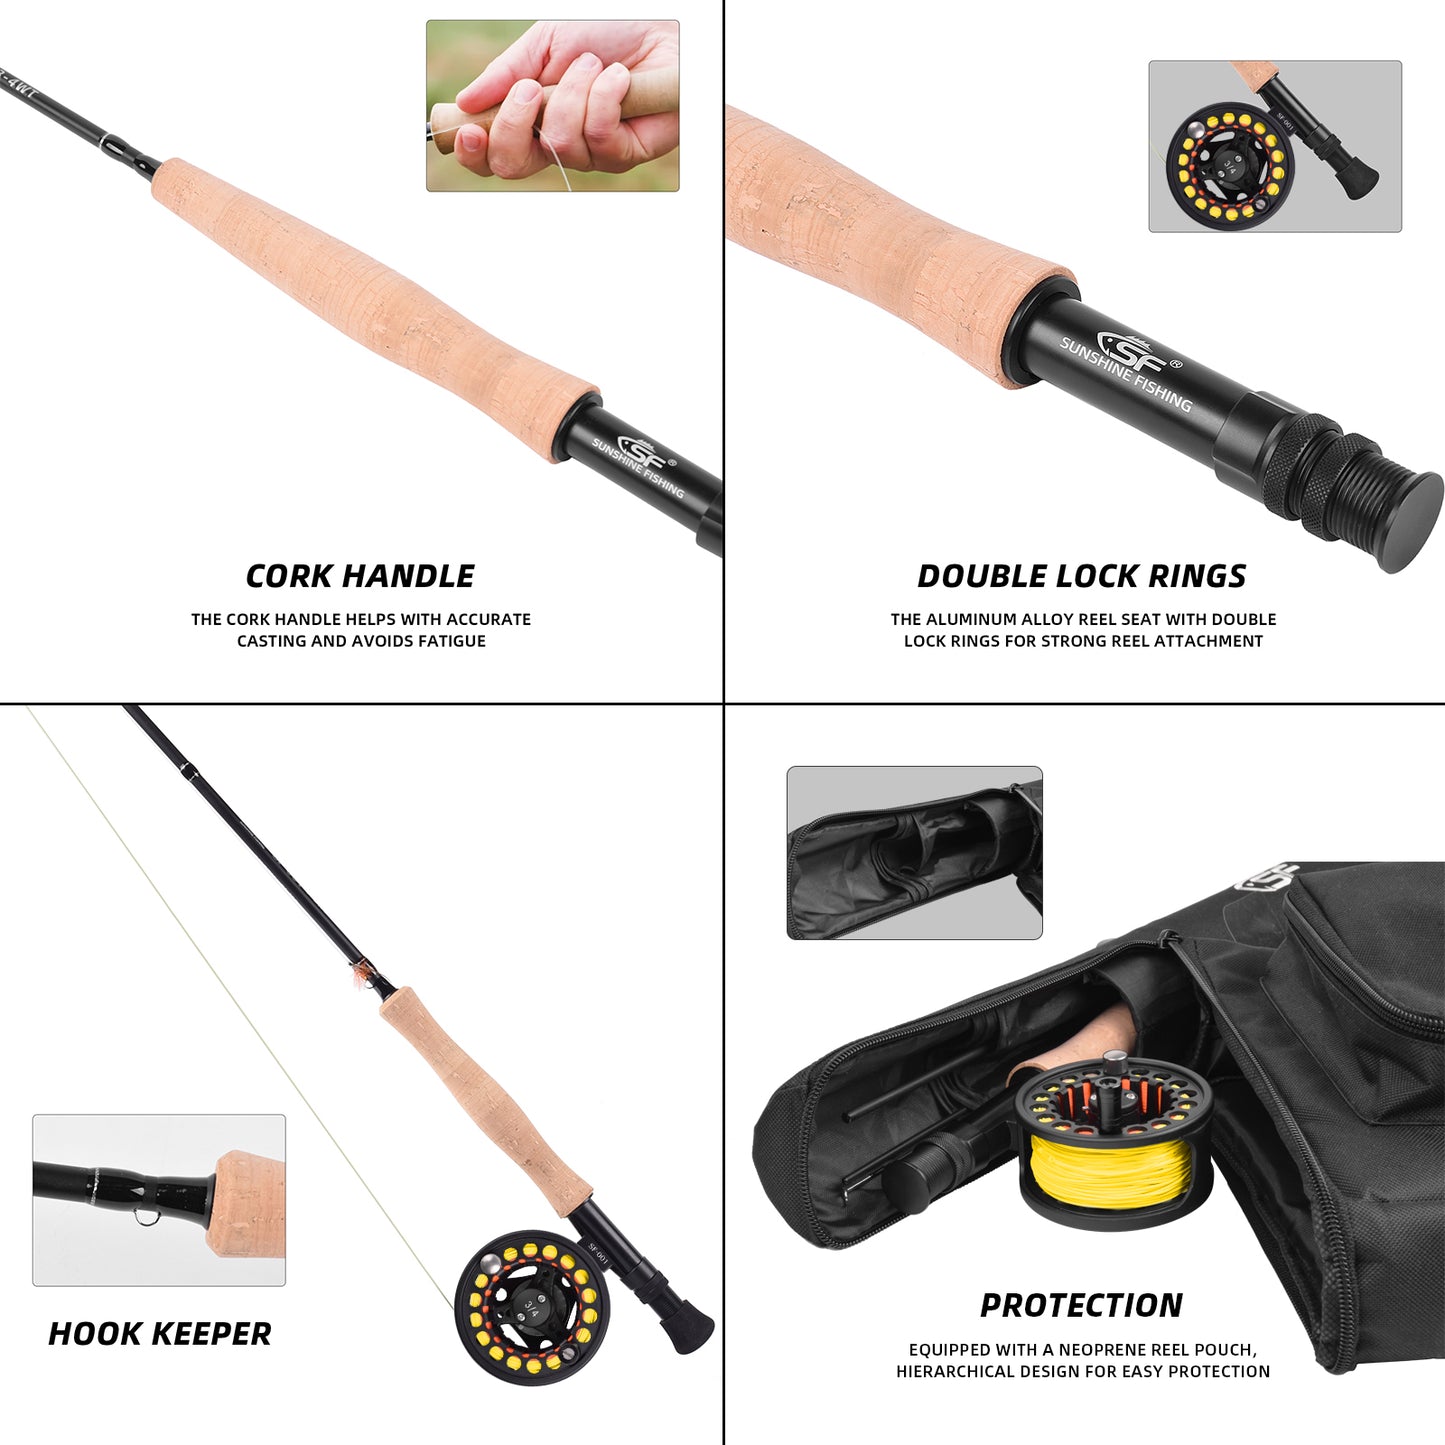 SF Fly Fishing Medium-Fast Action Rod Combo Kit 4 Piece 3/4wt 7.6FT for New and Younger Anglers